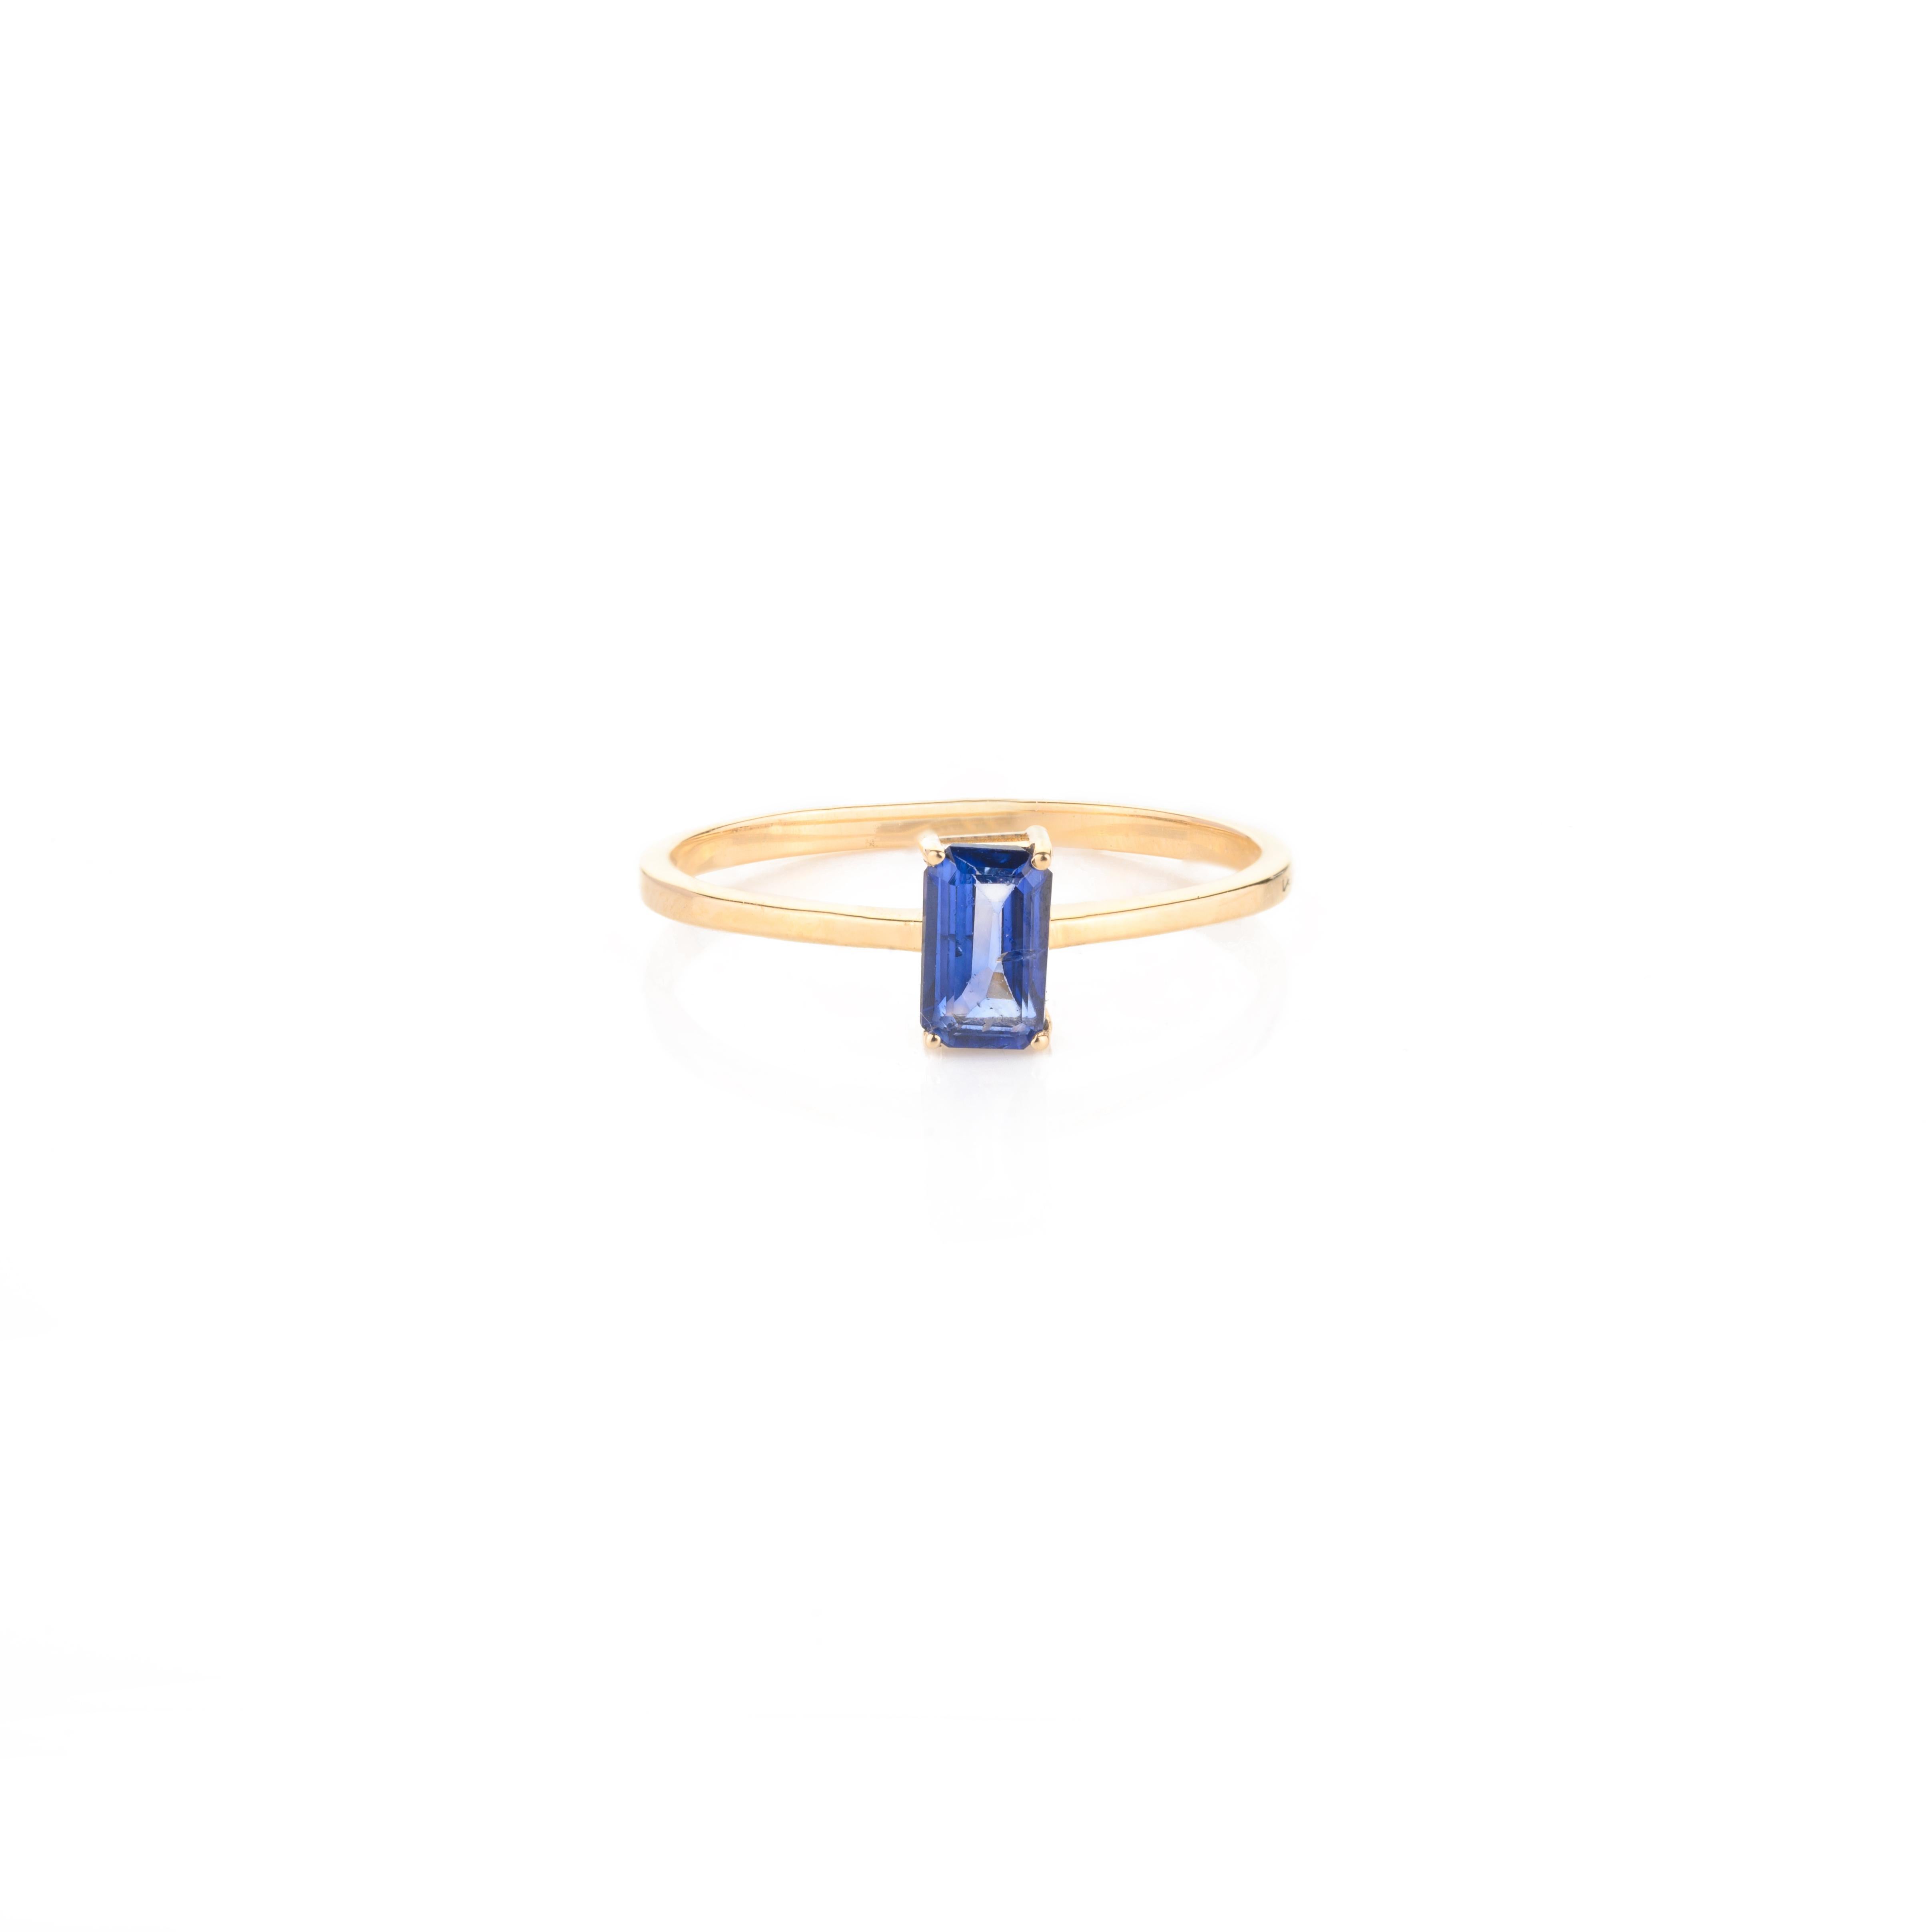 For Sale:  Minimal Baguette Cut Blue Sapphire Ring in 18k Solid Yellow Gold 3